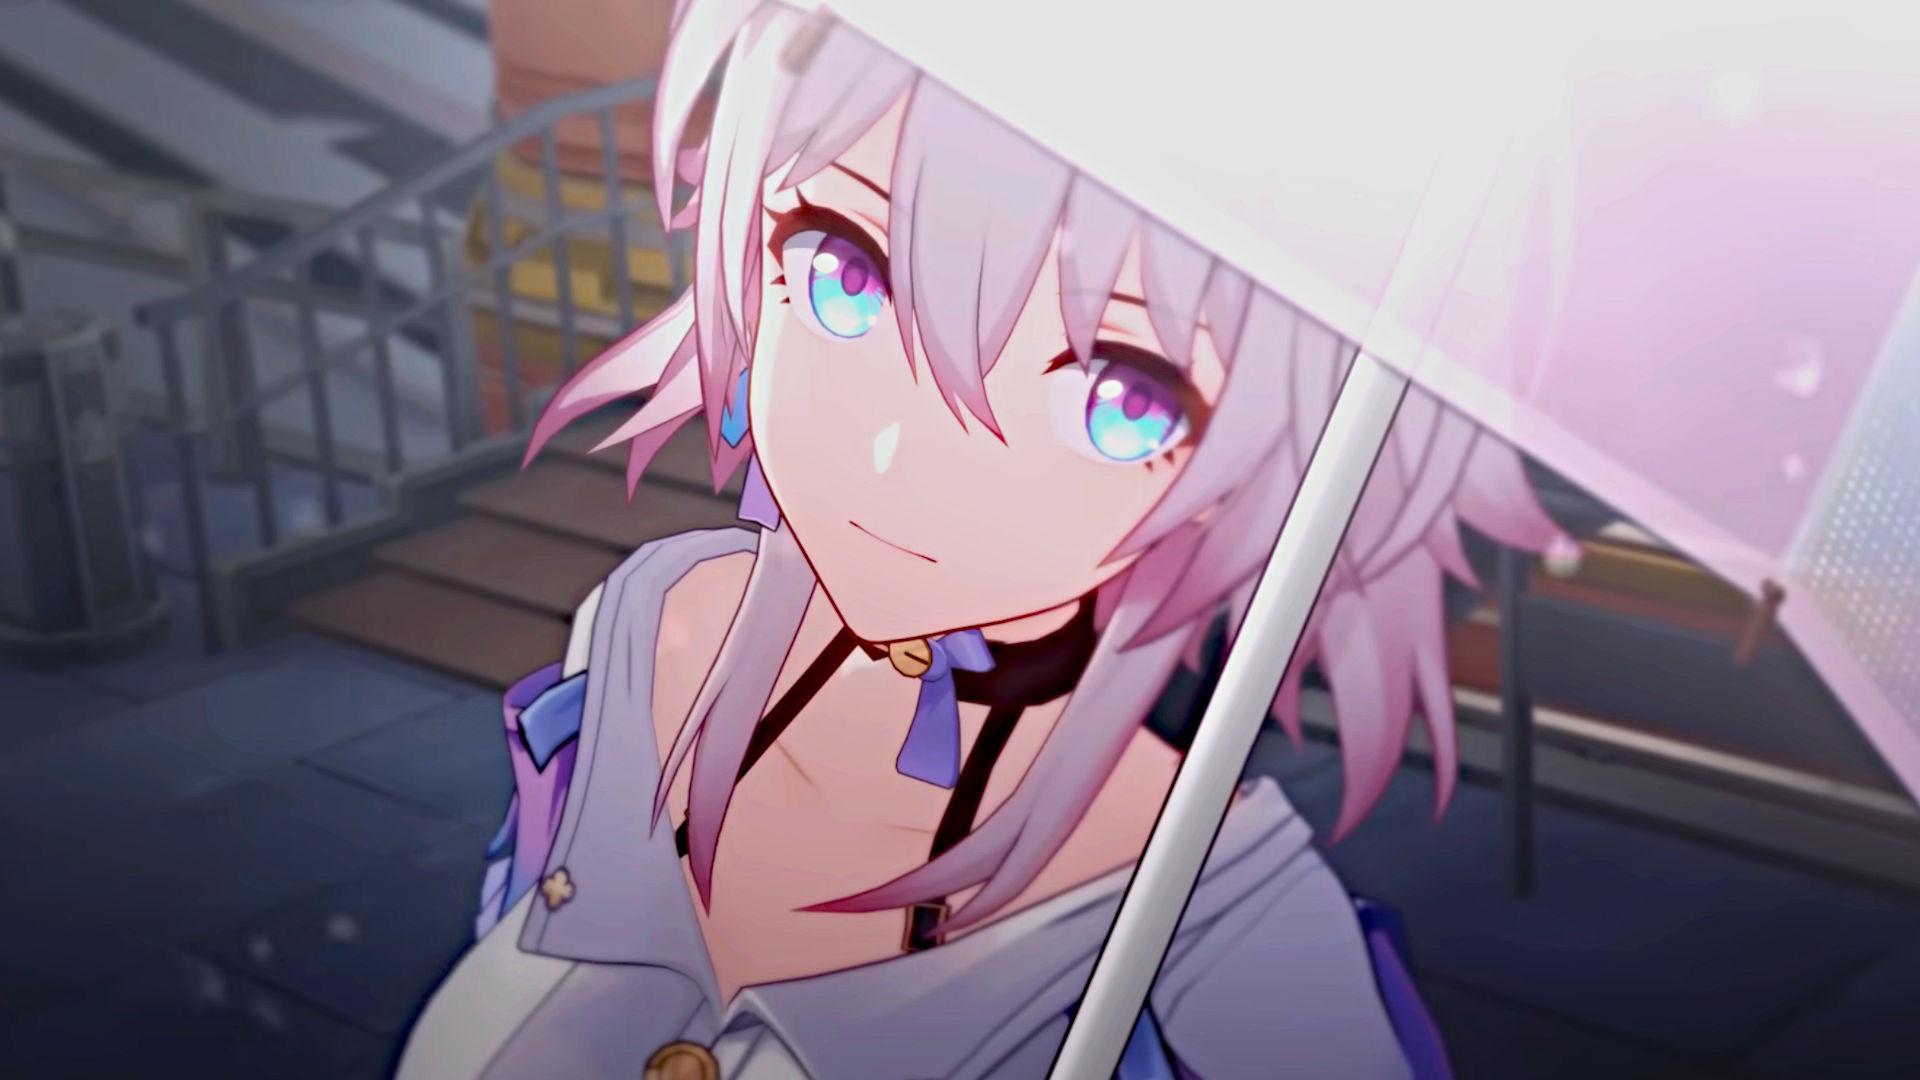 Honkai Star Rail 1.3 Release Date, Characters, Leaks, Plot, and More - News